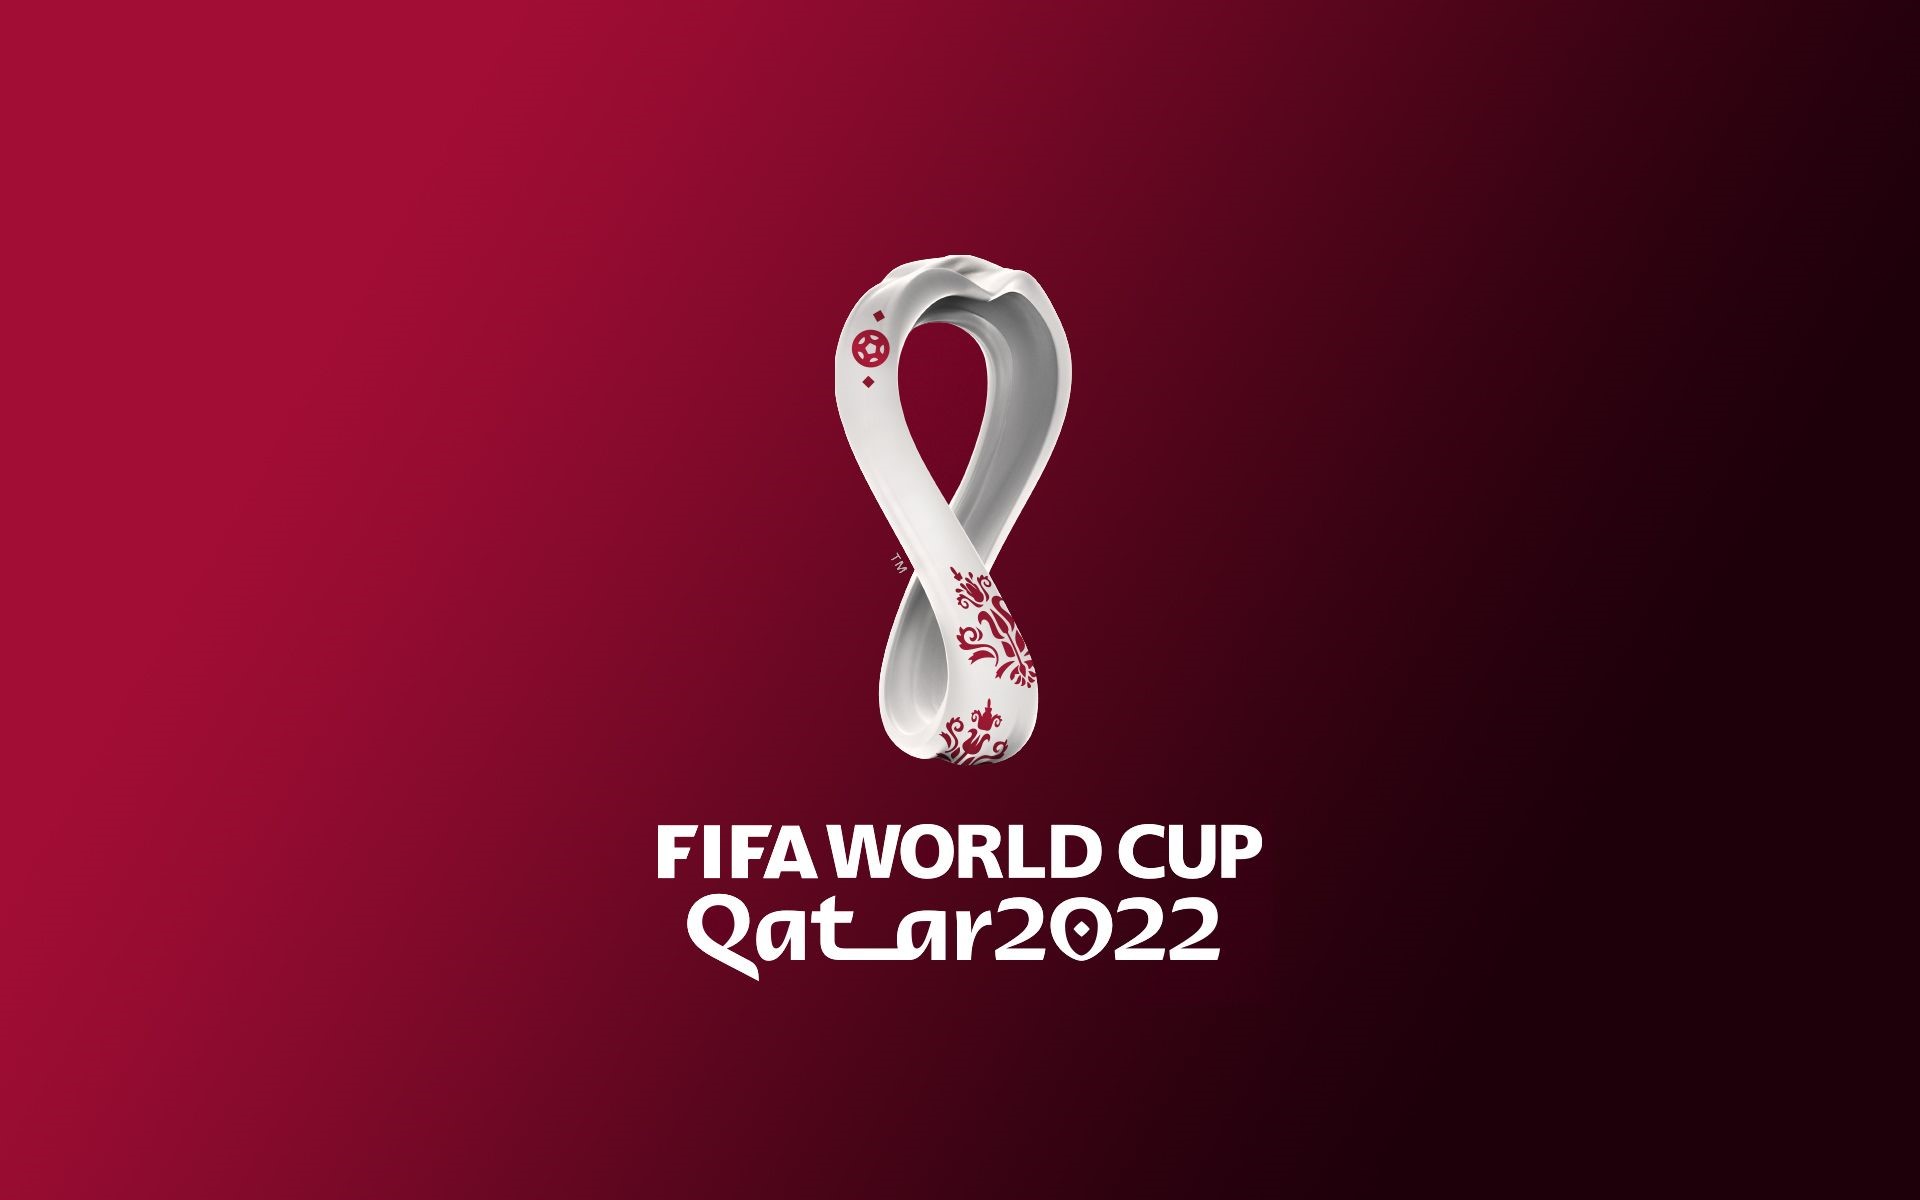 10 Most Favorite Teams of FIFA World Cup Qatar 2022